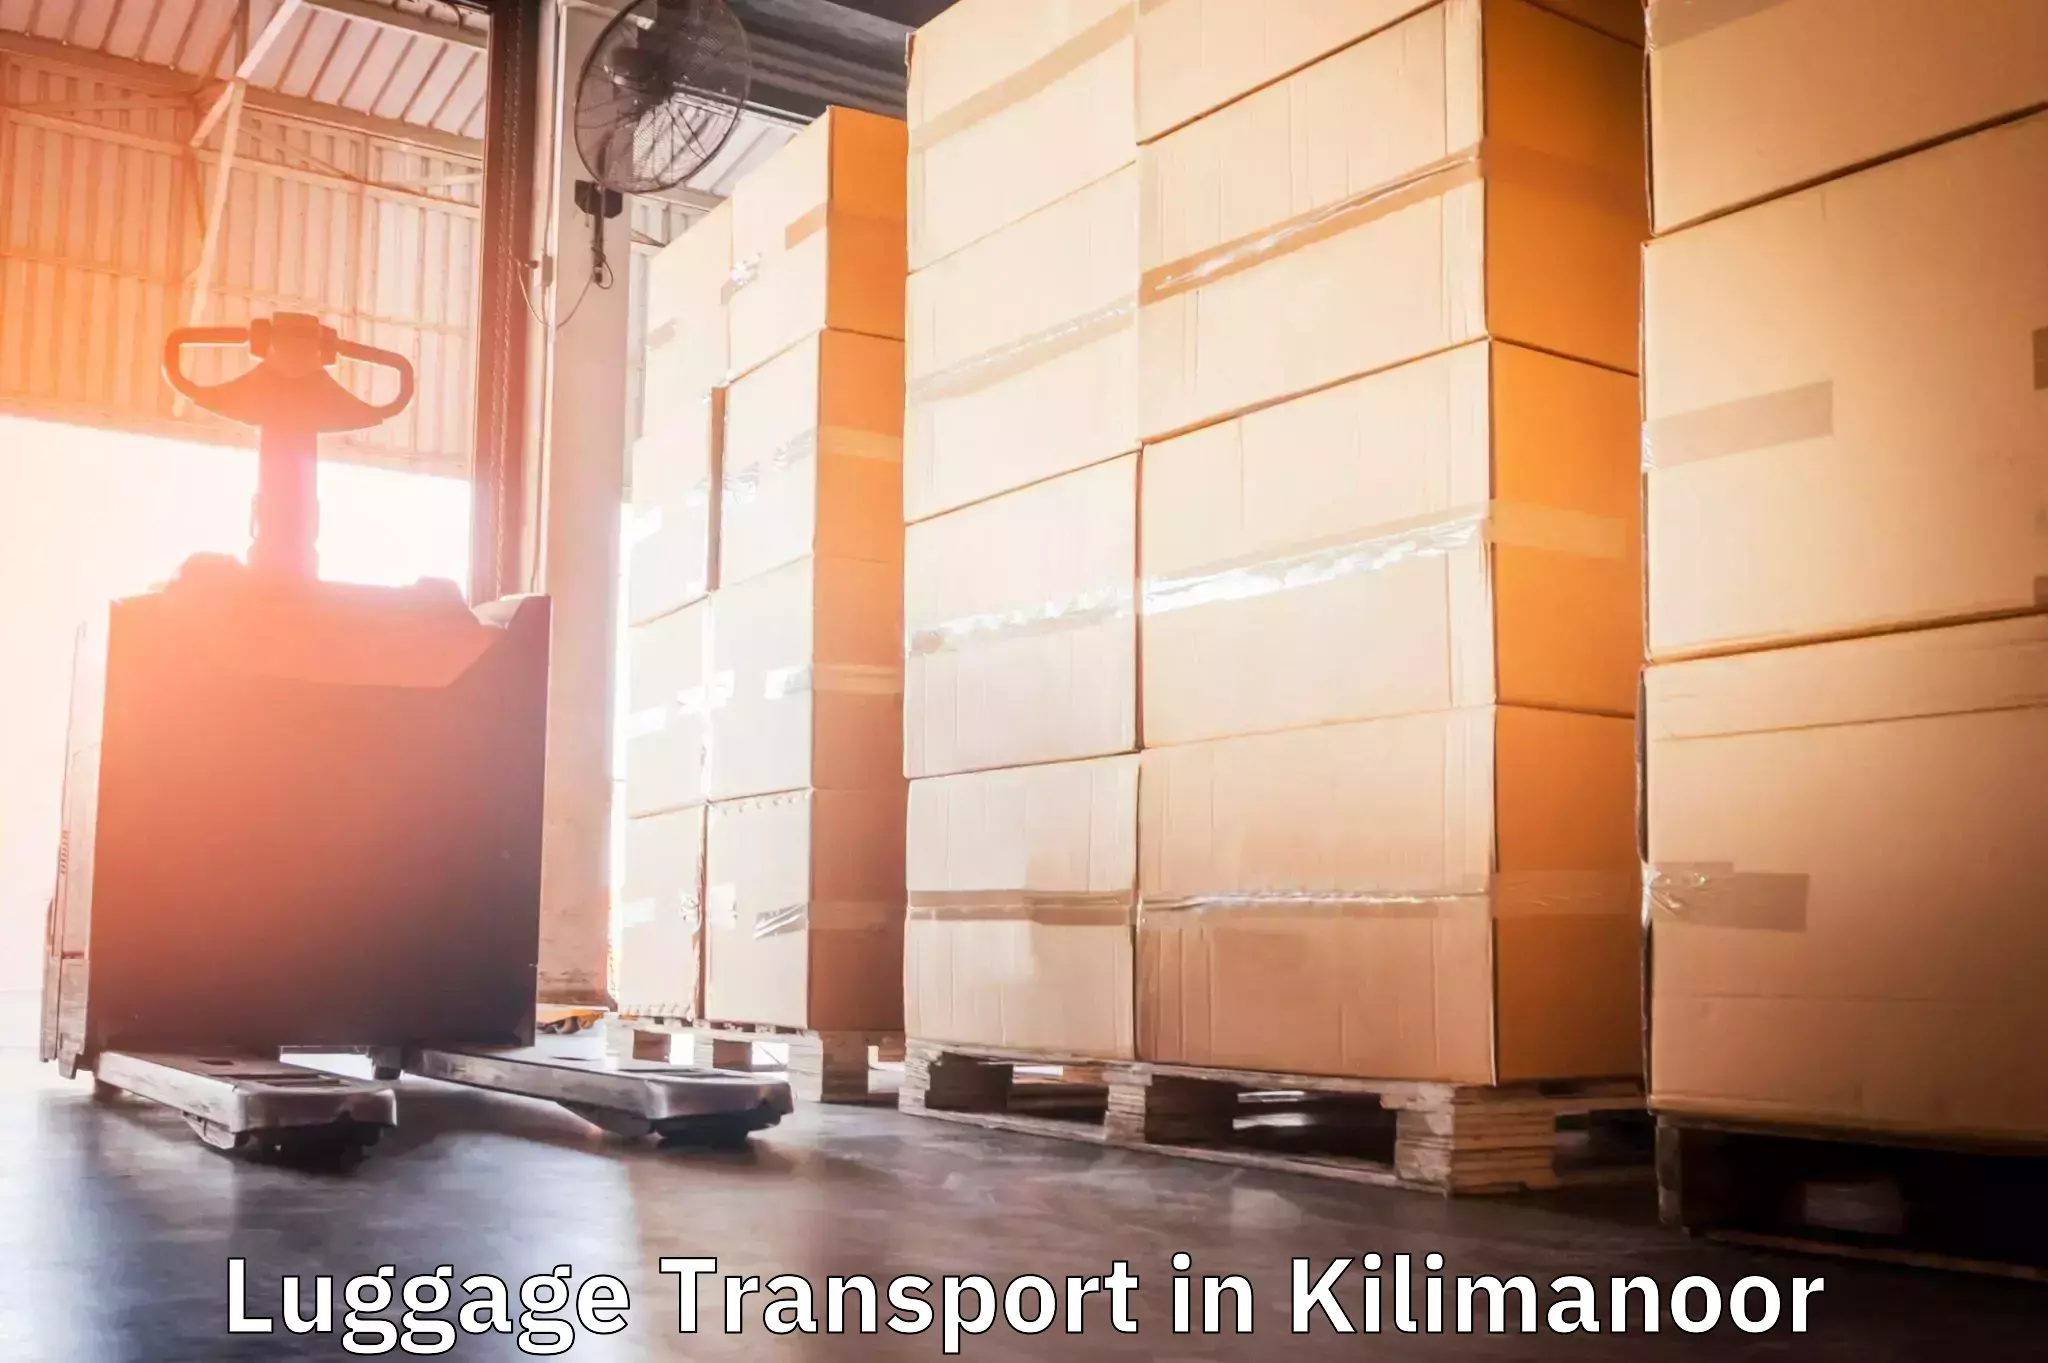 Luggage transport consulting in Kilimanoor